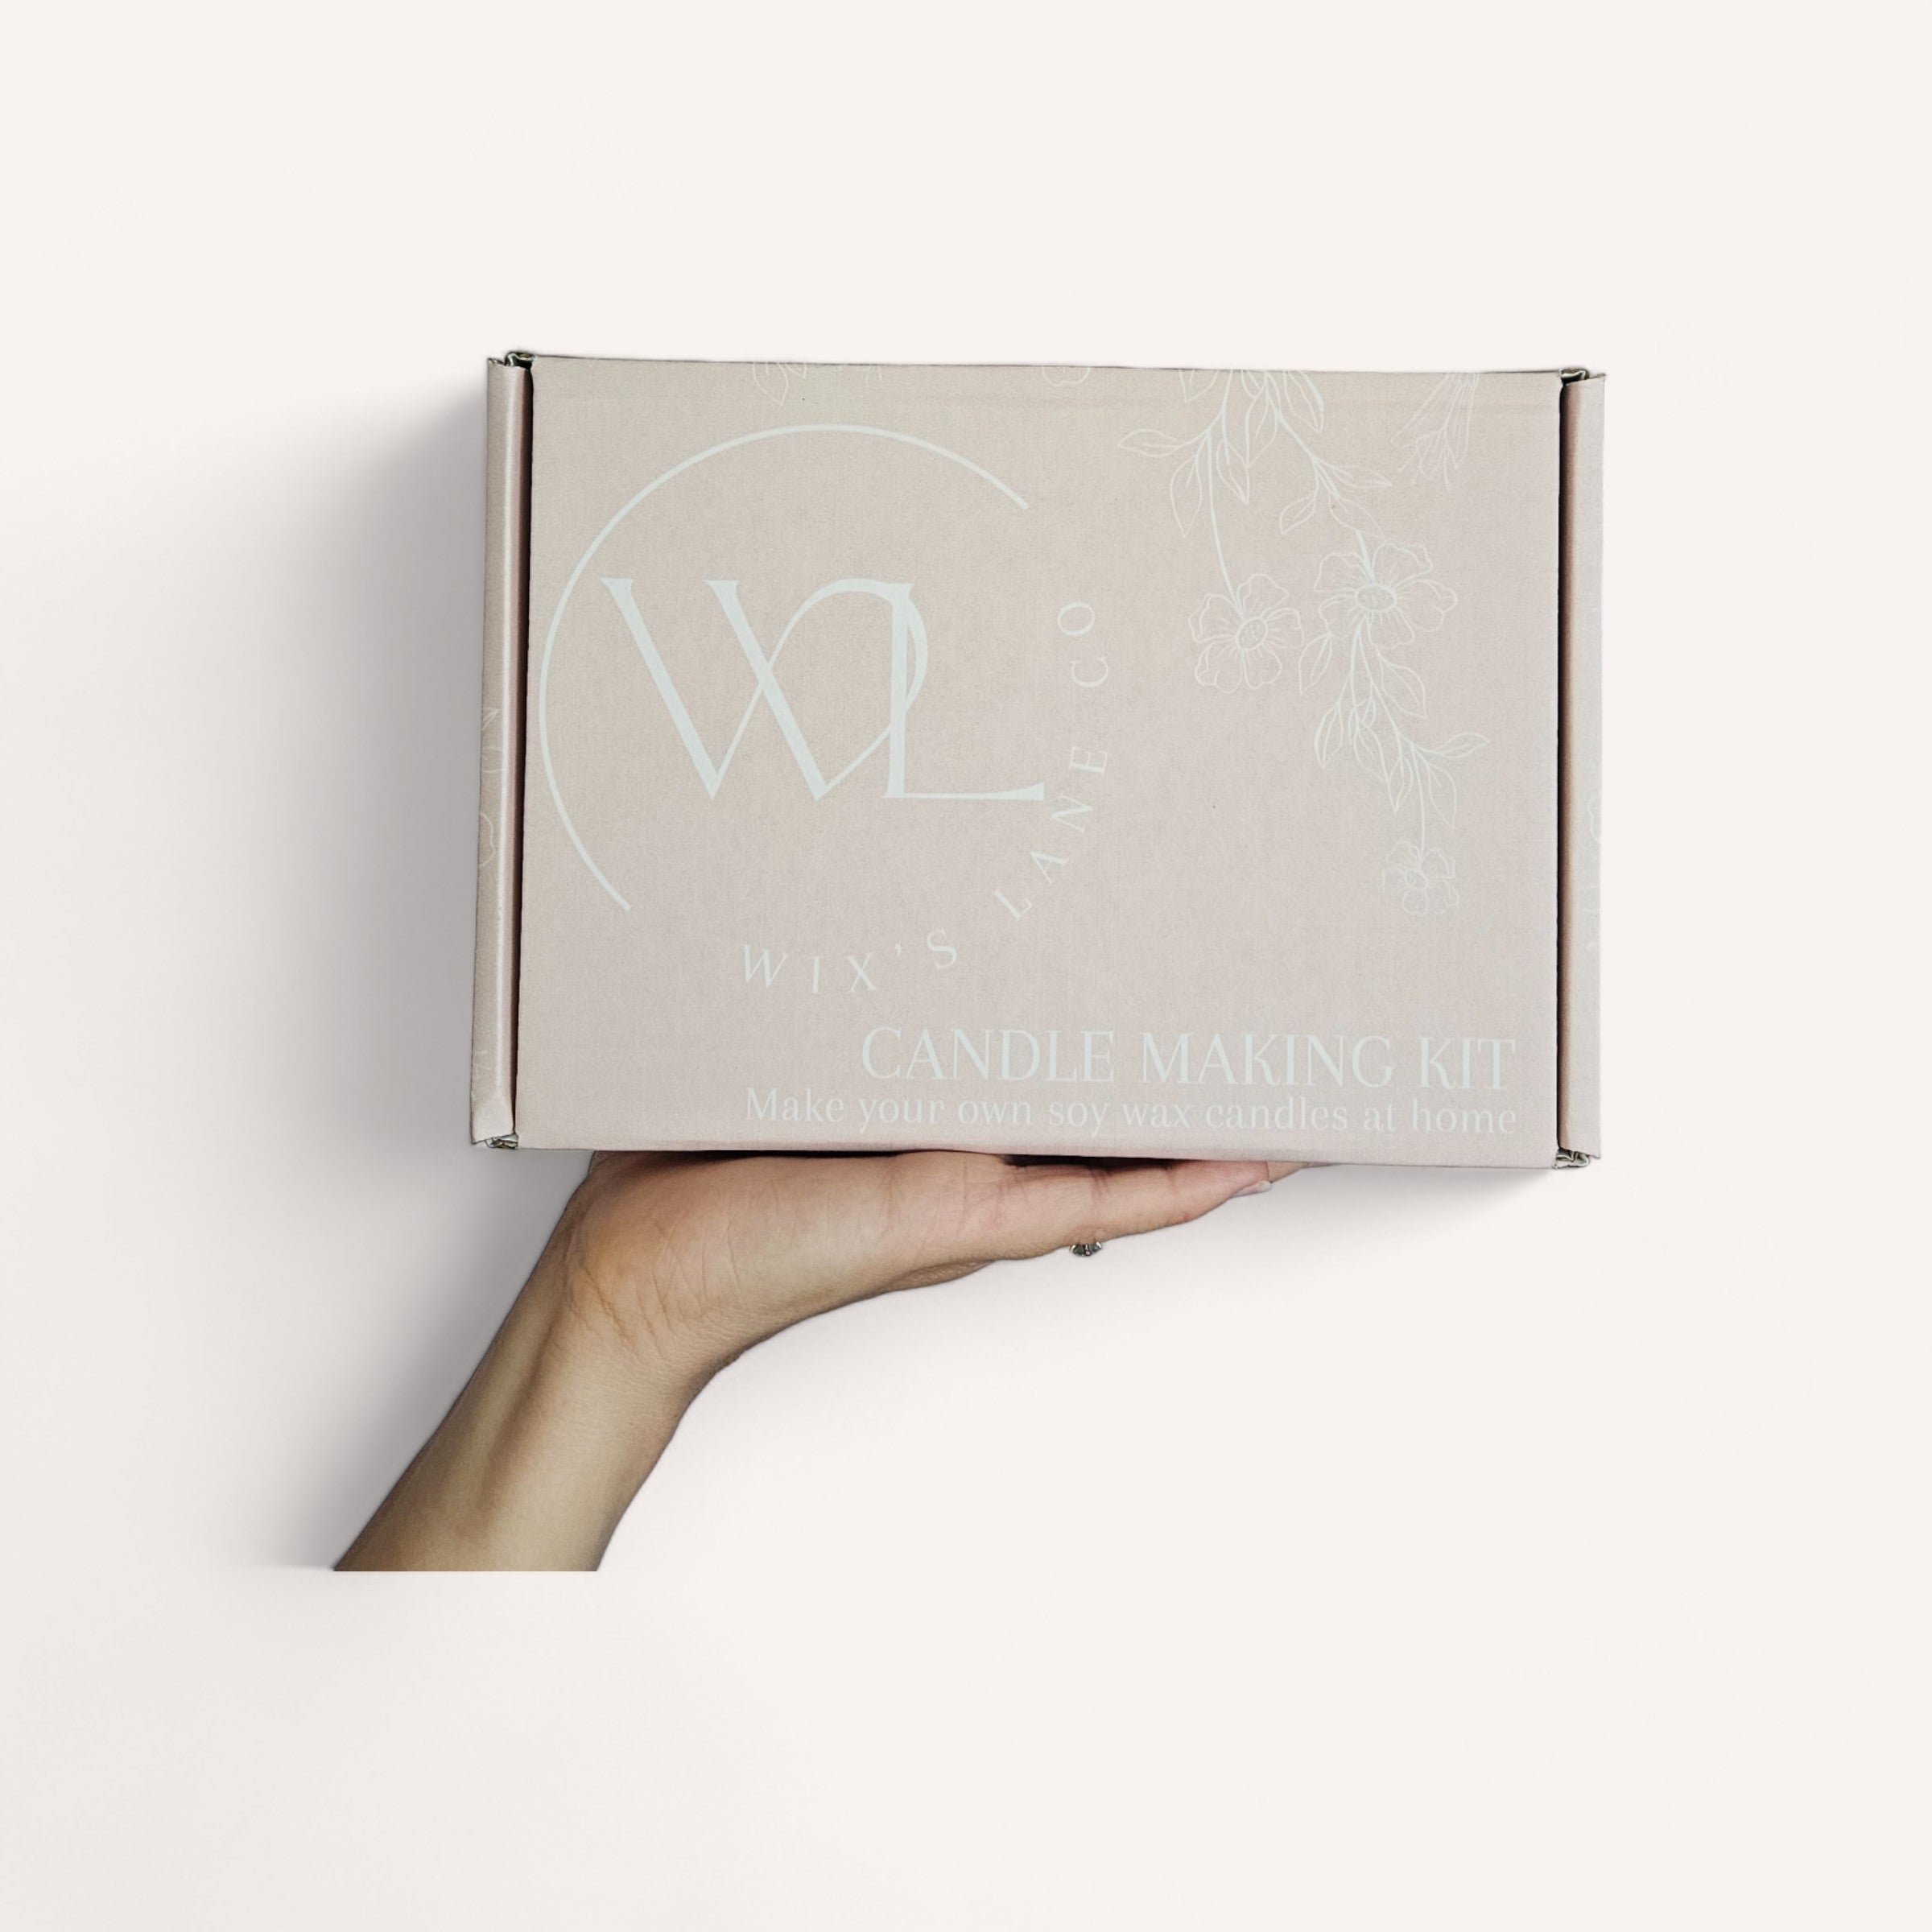 A hand presenting a Candle Making Kit by Wix's Lane Co. box with candle making instructions against a white background.